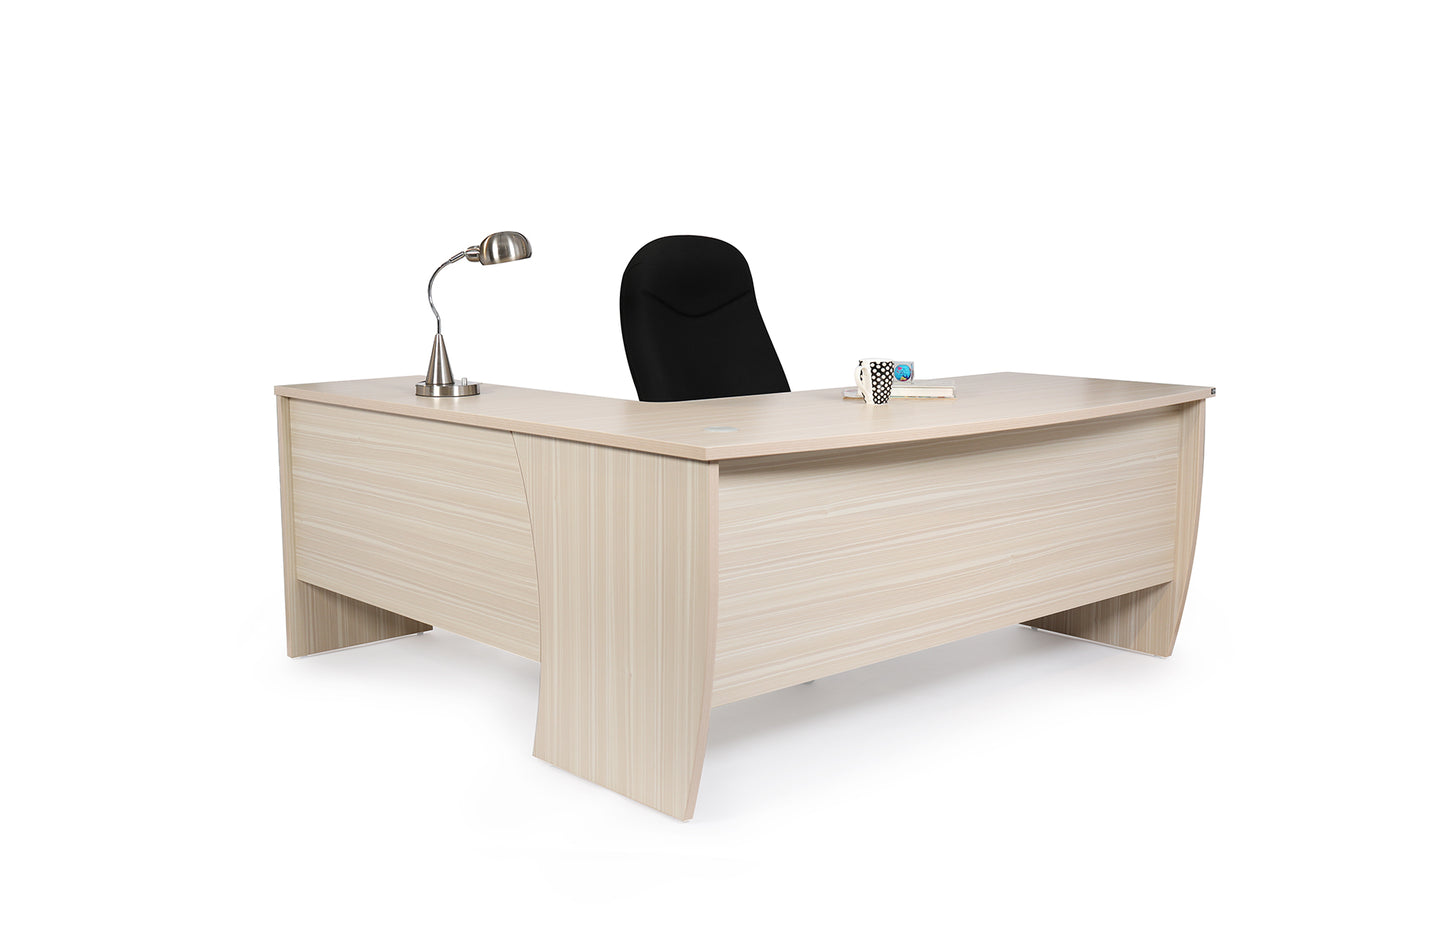 Manager Desk (MO-MD-MS-05)